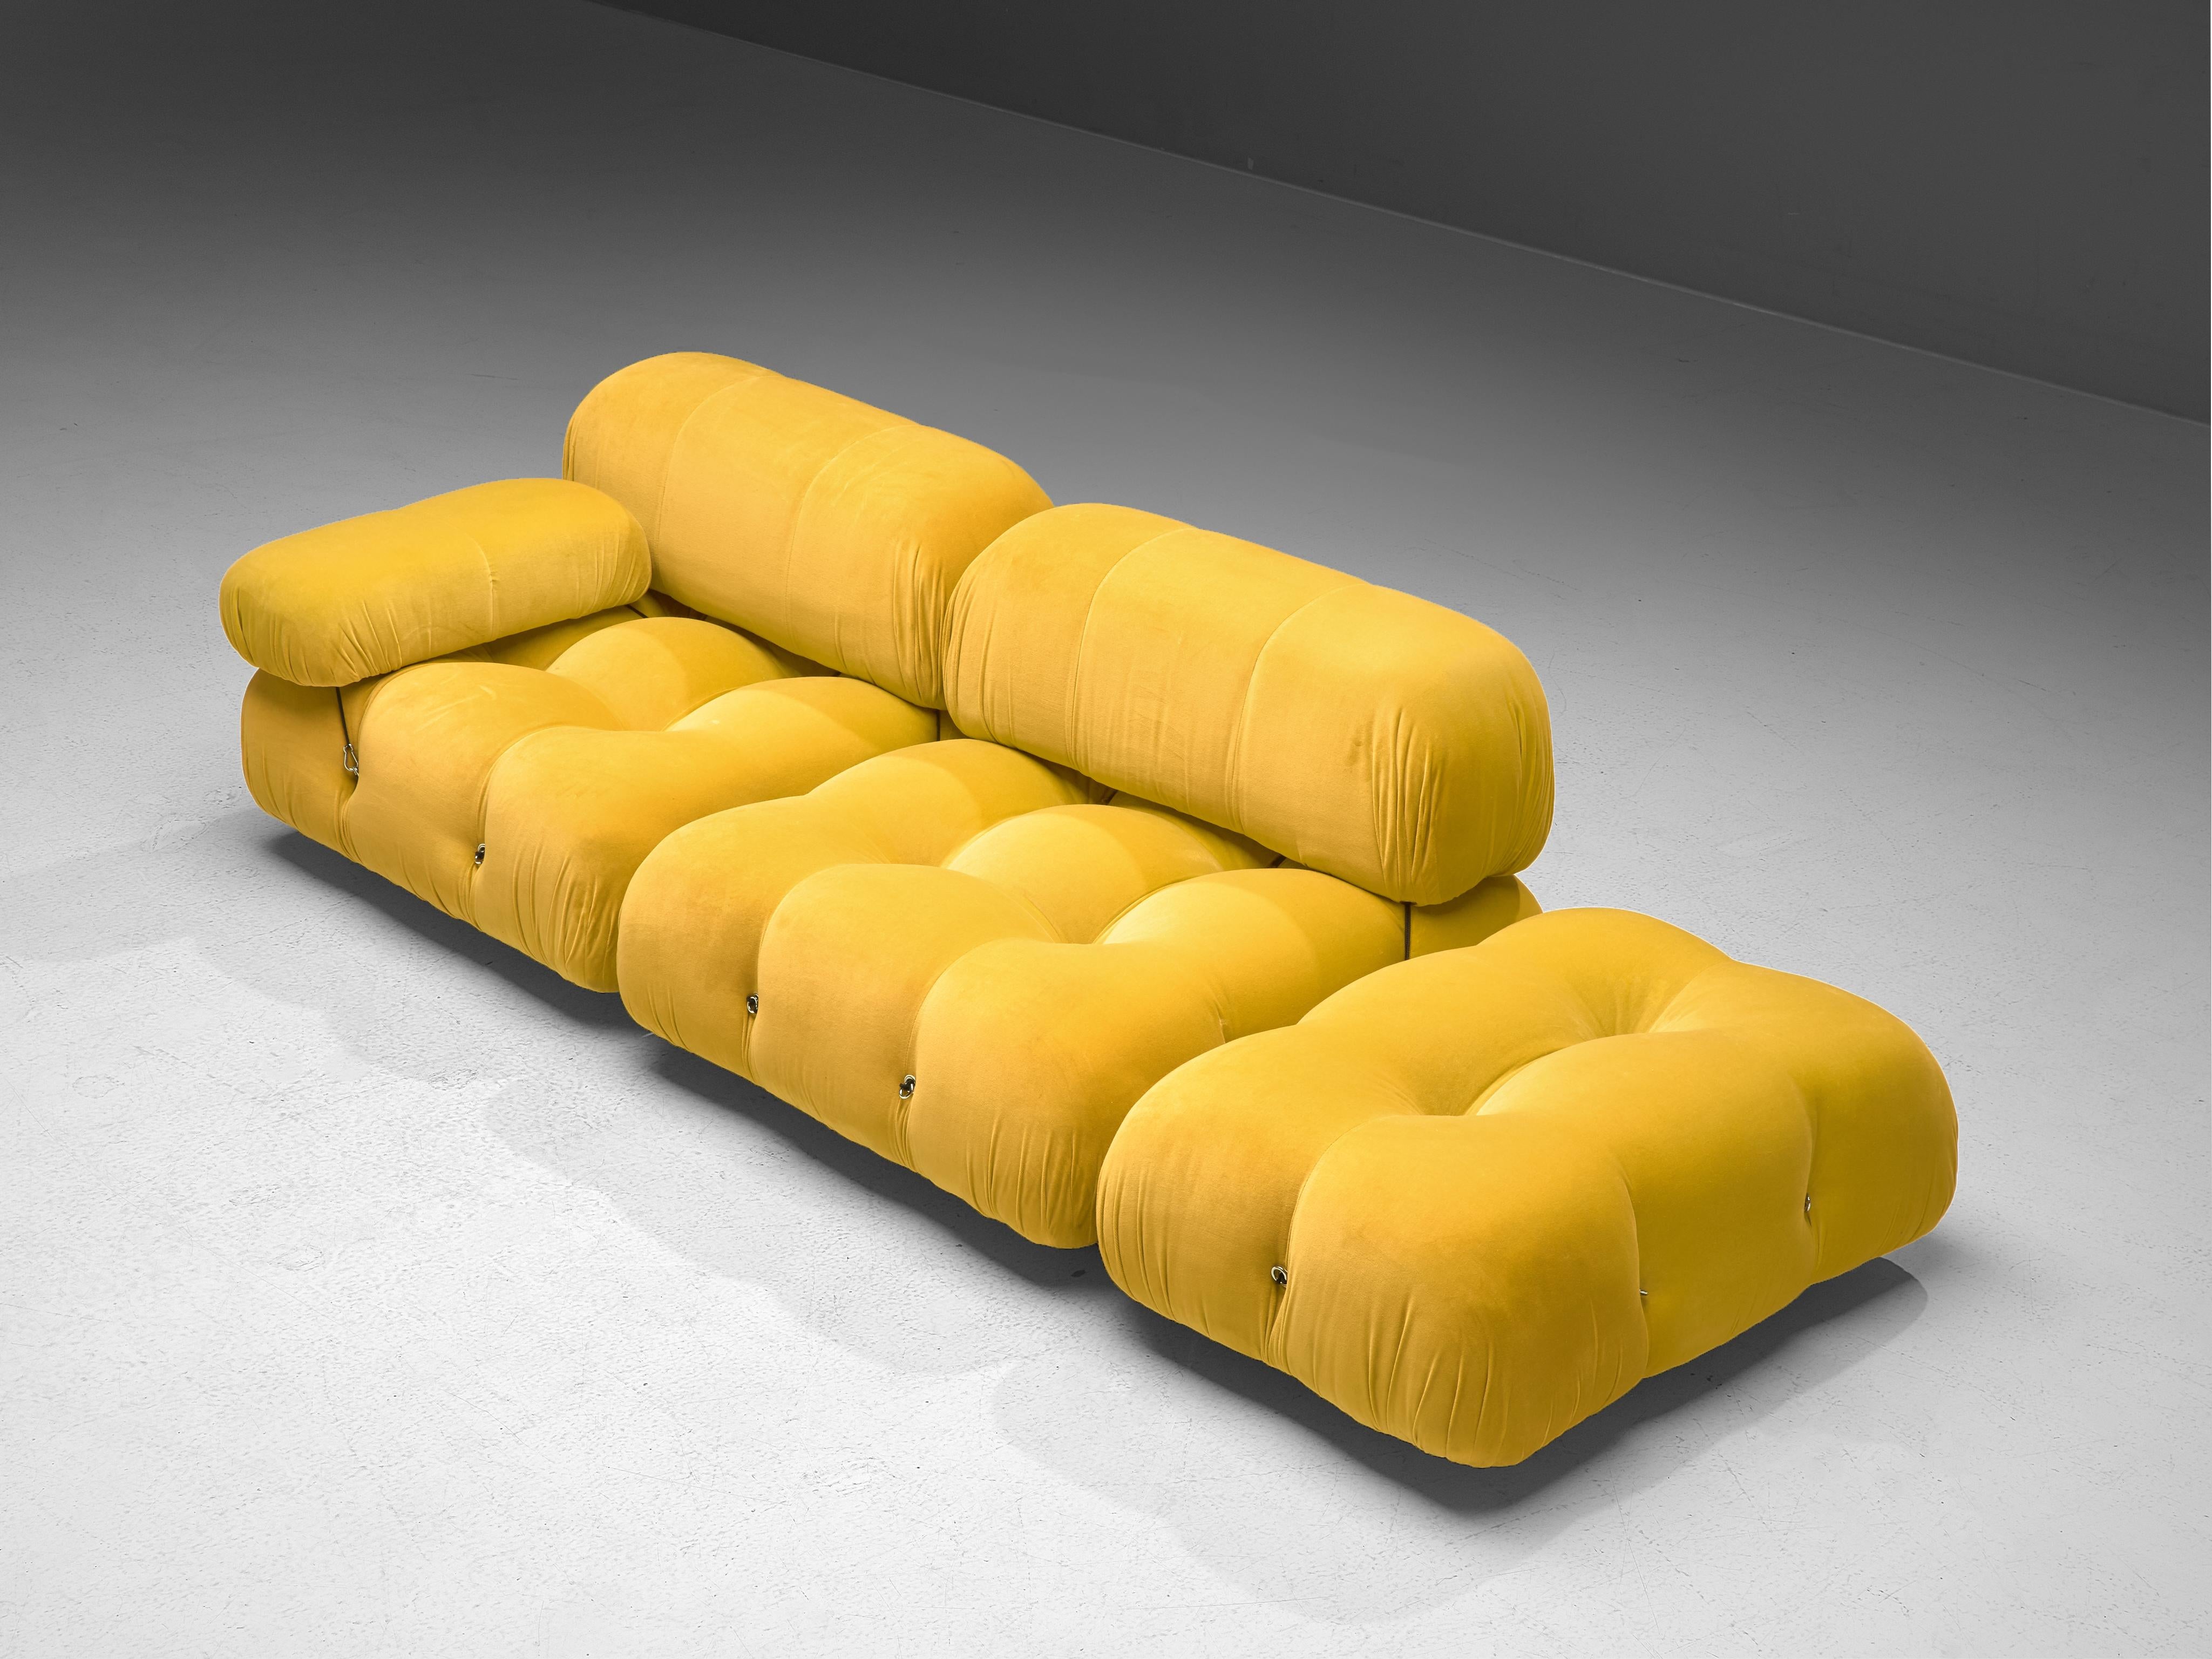 Mario Bellini, modular 'Cameleonda' sofa, yellow velvet, Italy, designed in 1972

The sectional elements of this sofa can be used freely and apart from one another. The backs are provided with rings and carabiners, which allows the user to create